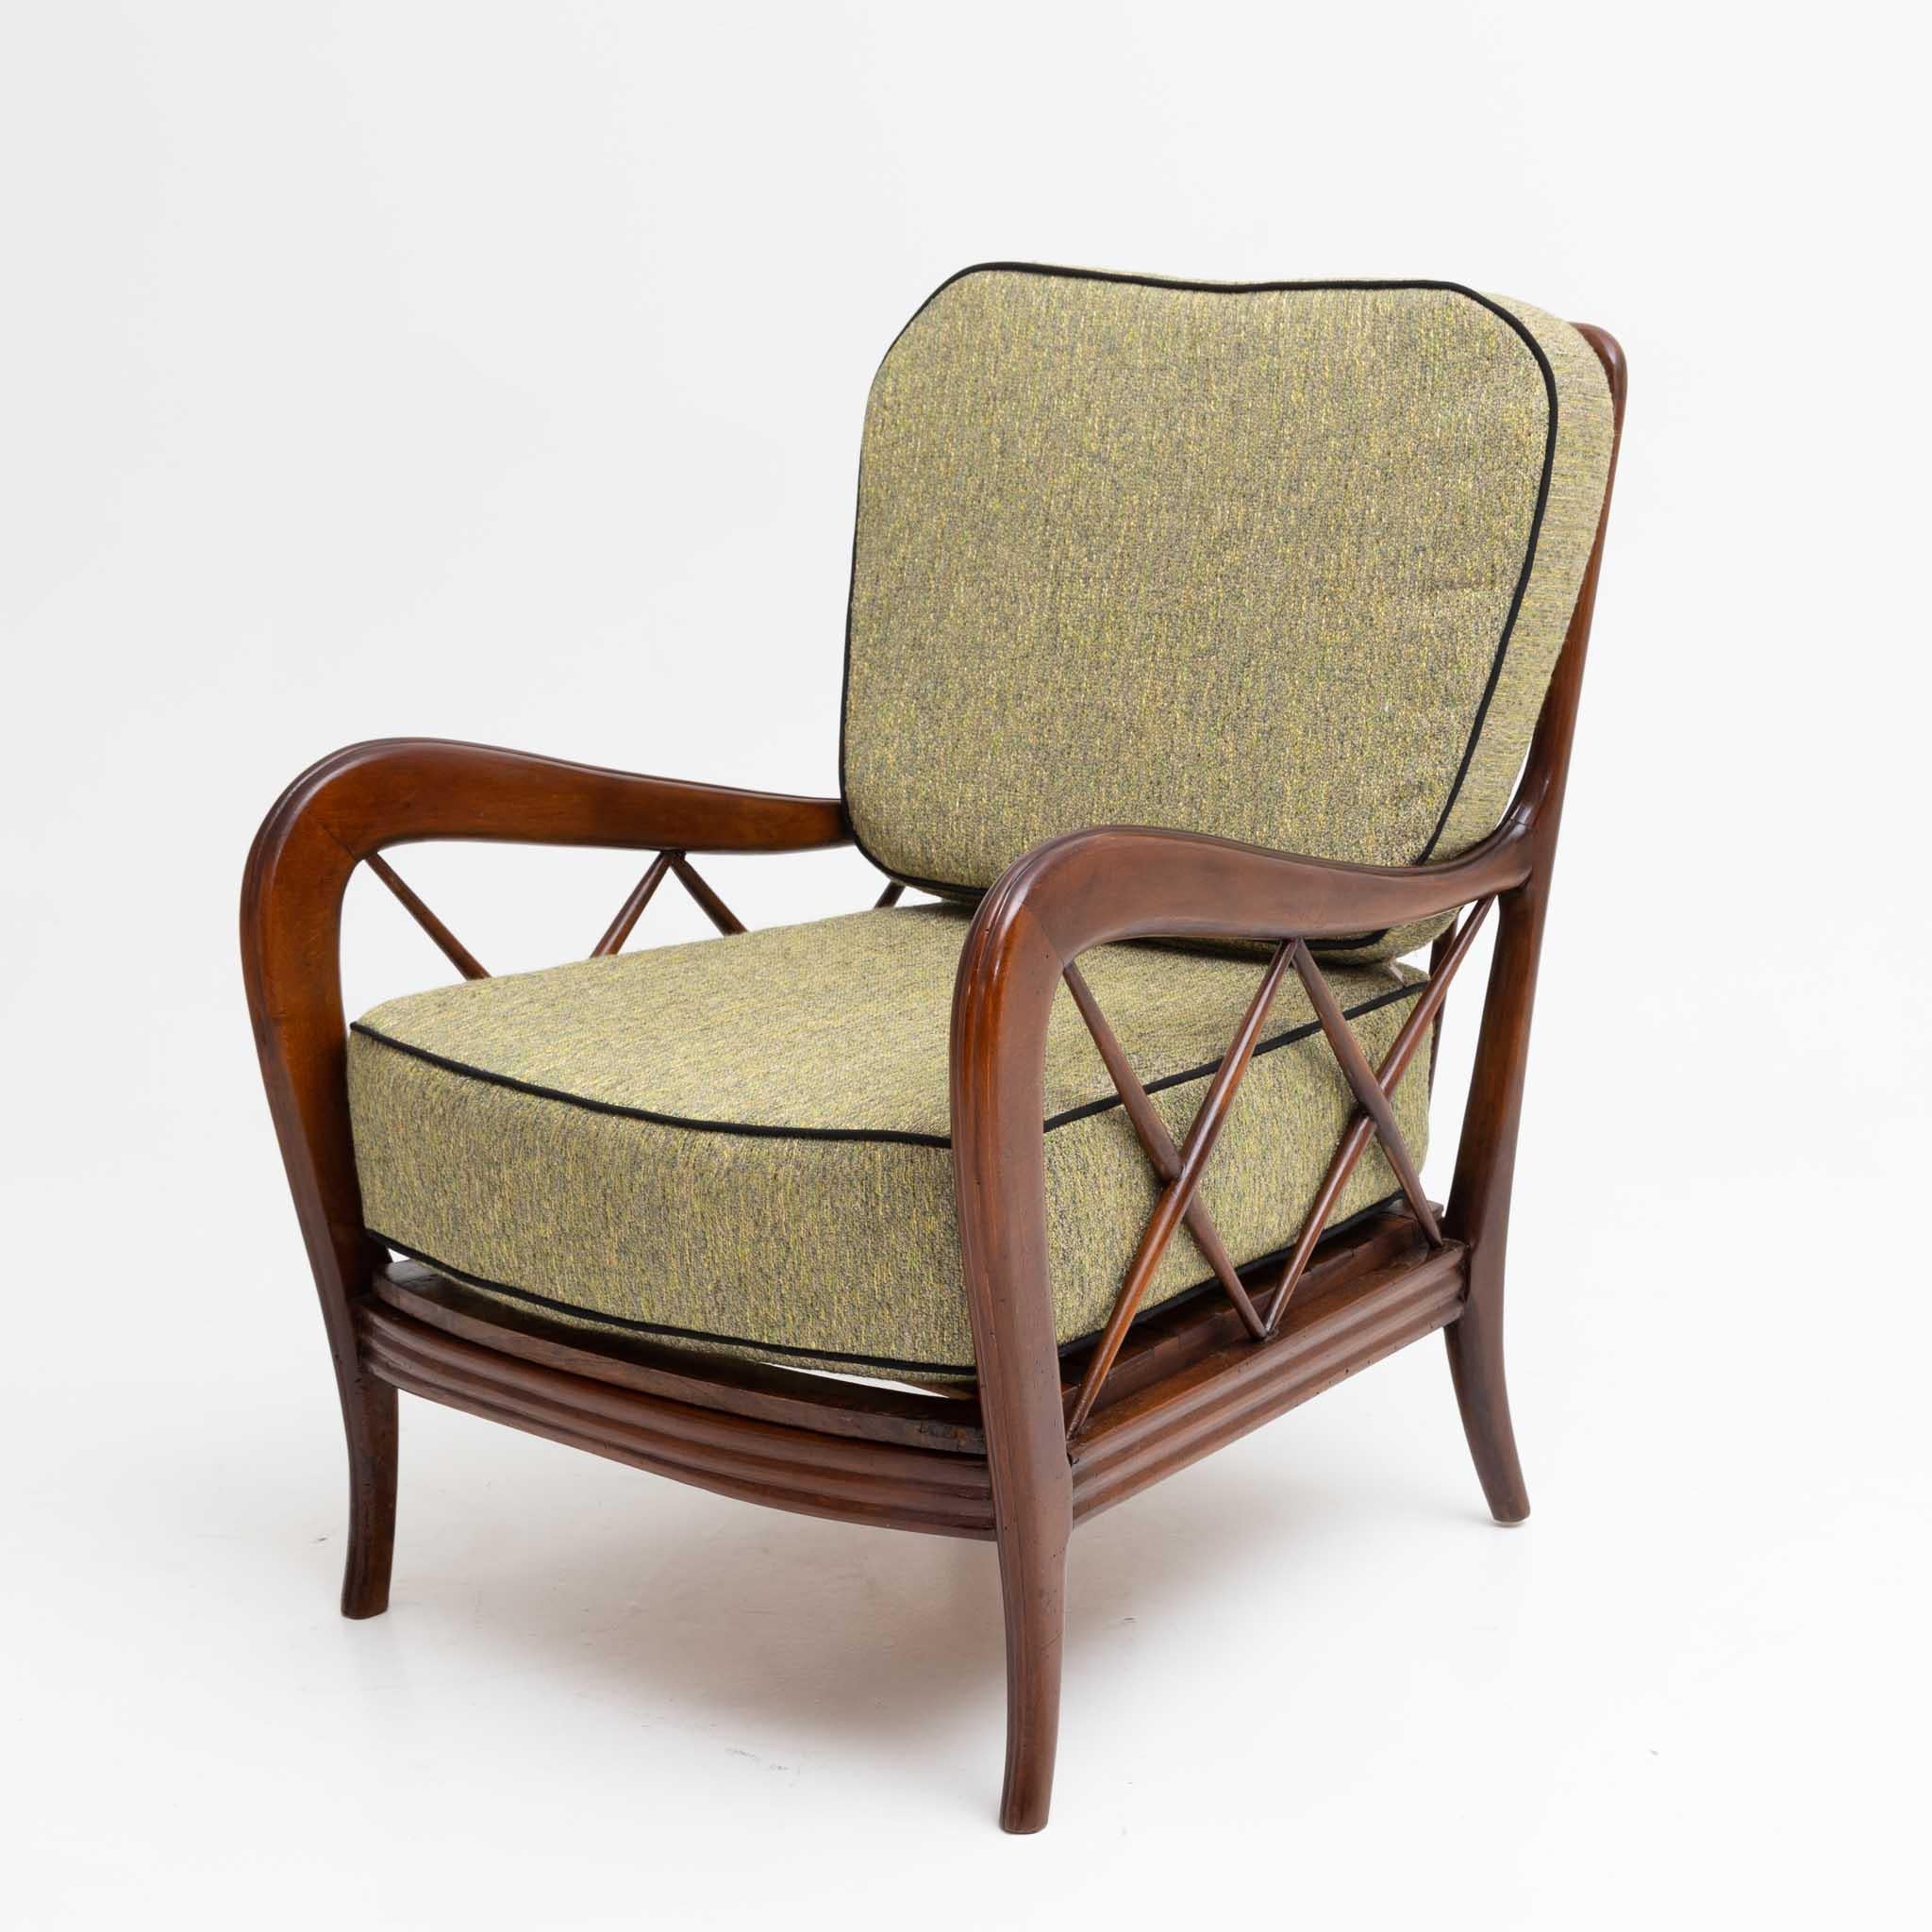 Italian Pair of green Armchairs by Paolo Buffa, polished and reupholstered, Italy, 1940s